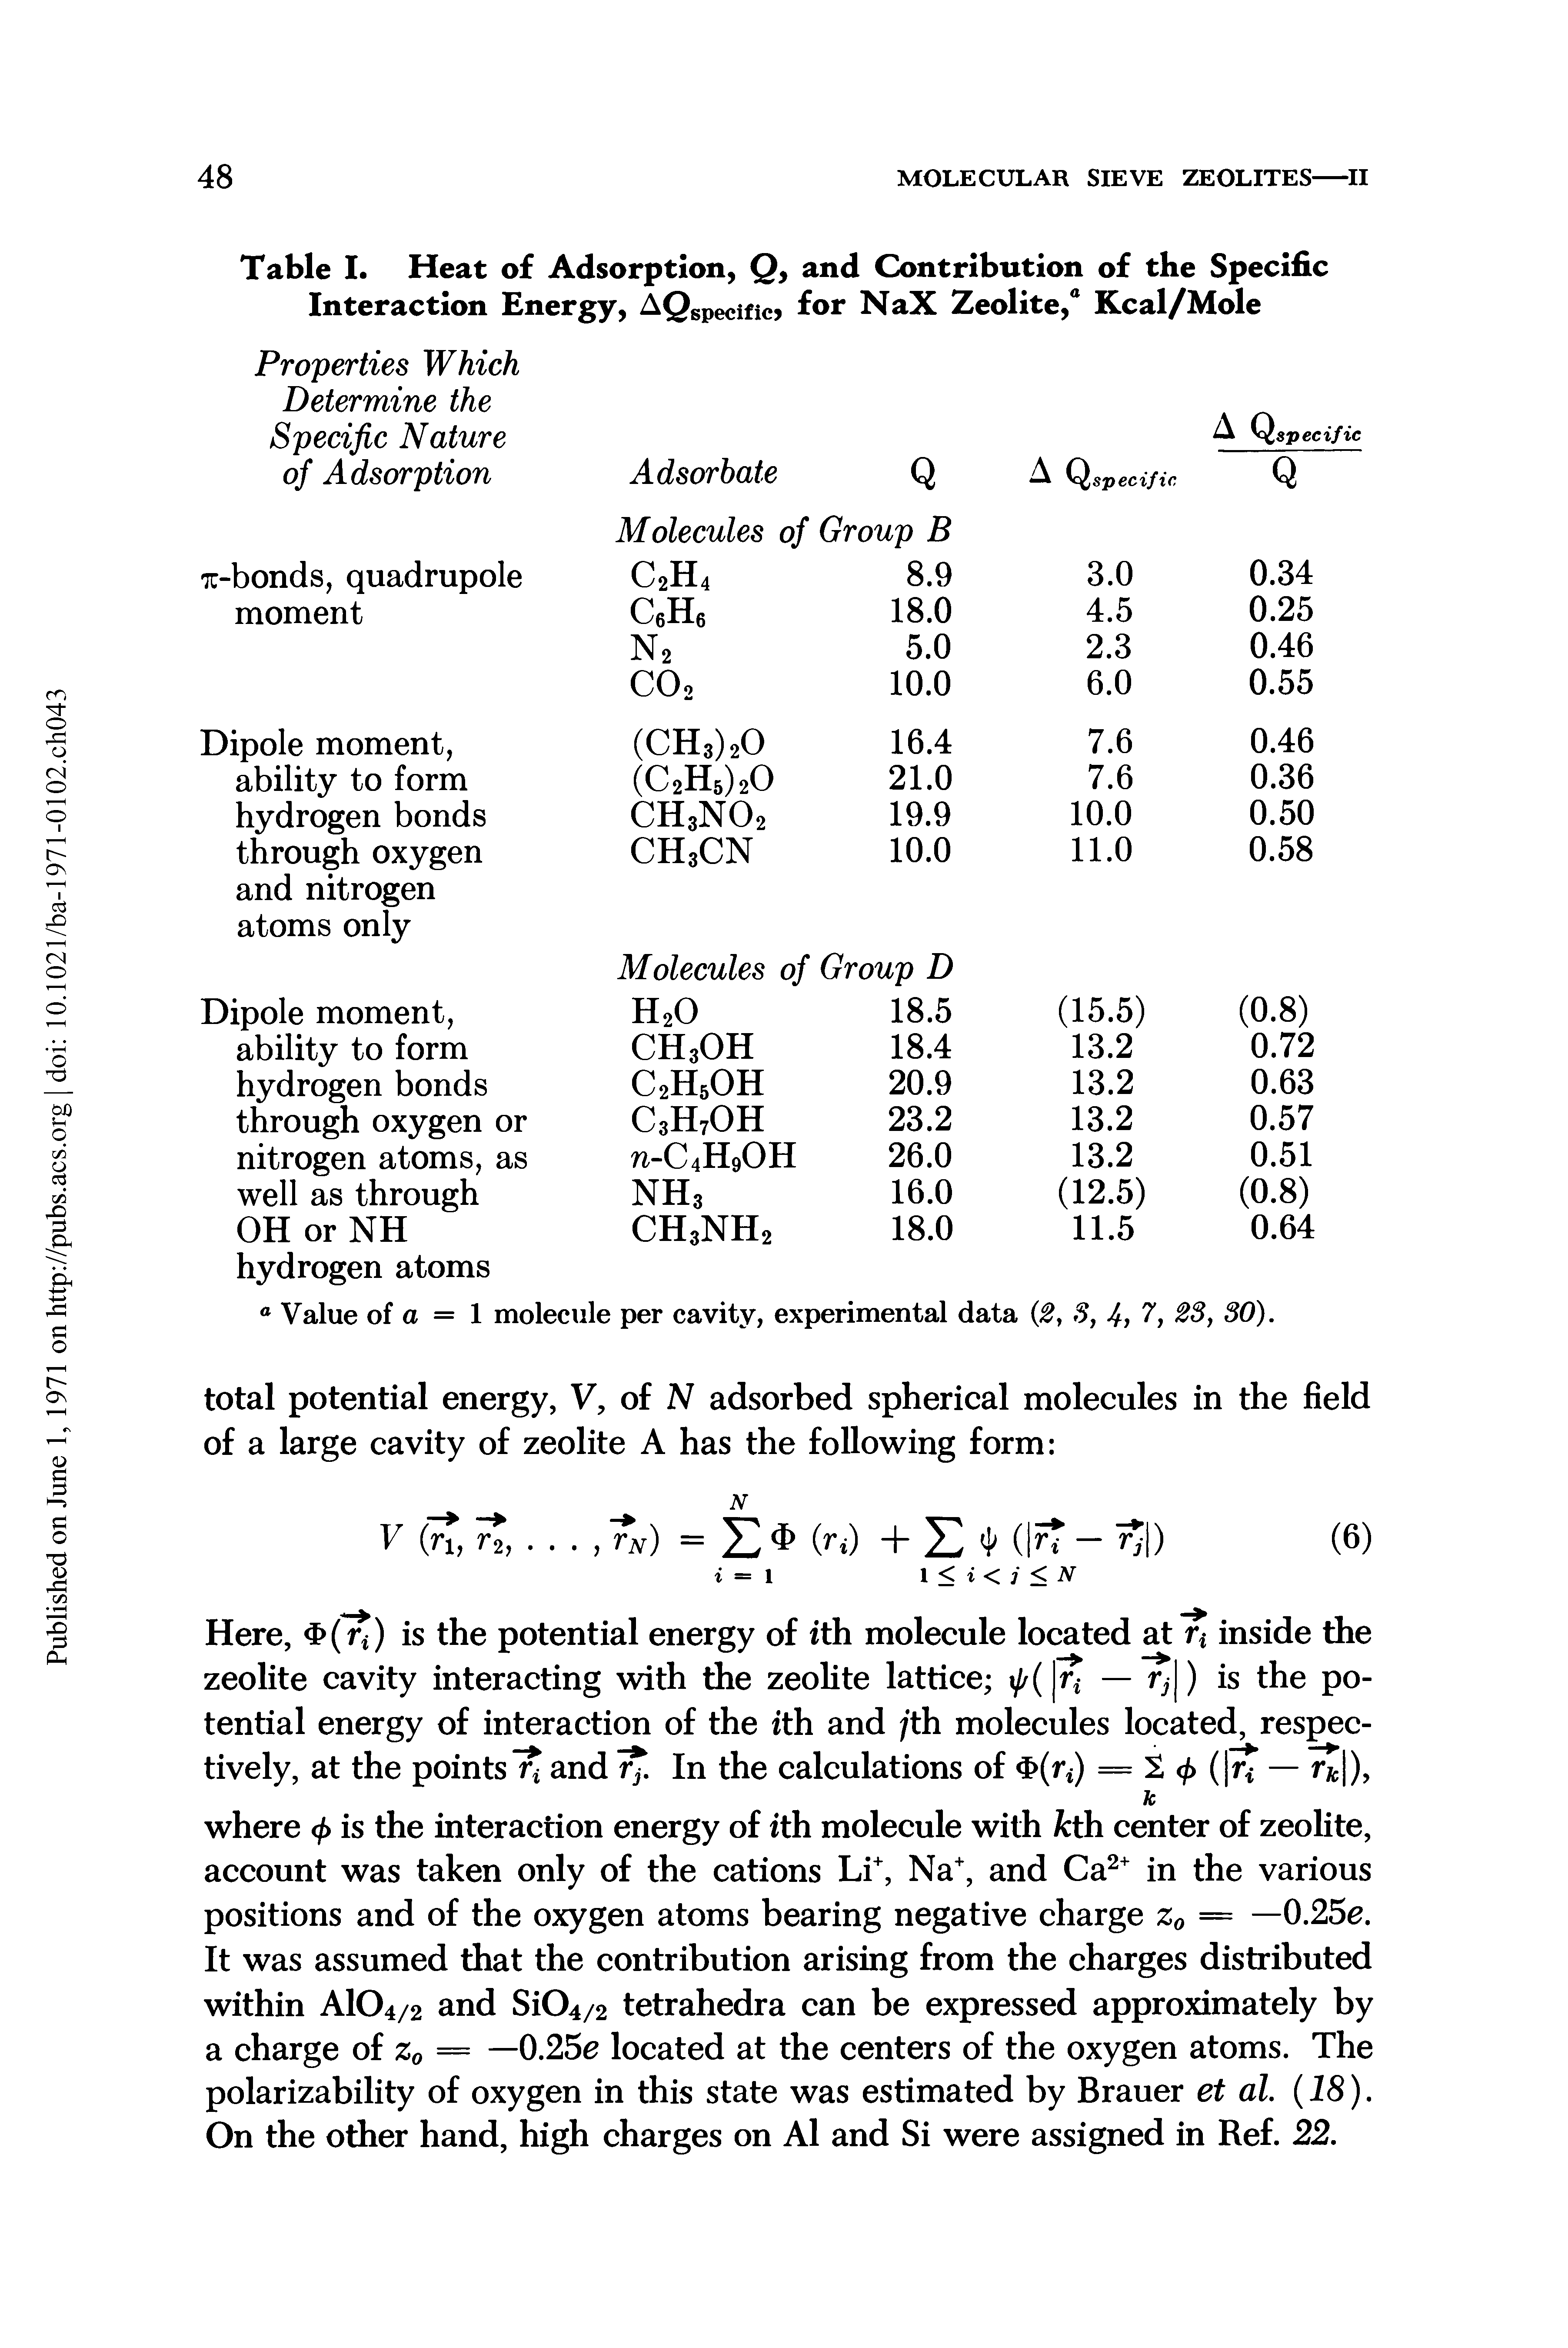 Table I. Heat of Adsorption, Q, and Contribution of the Specific Interaction Energy, AQgpecific for NaX Zeolite, Kcal/Mole...